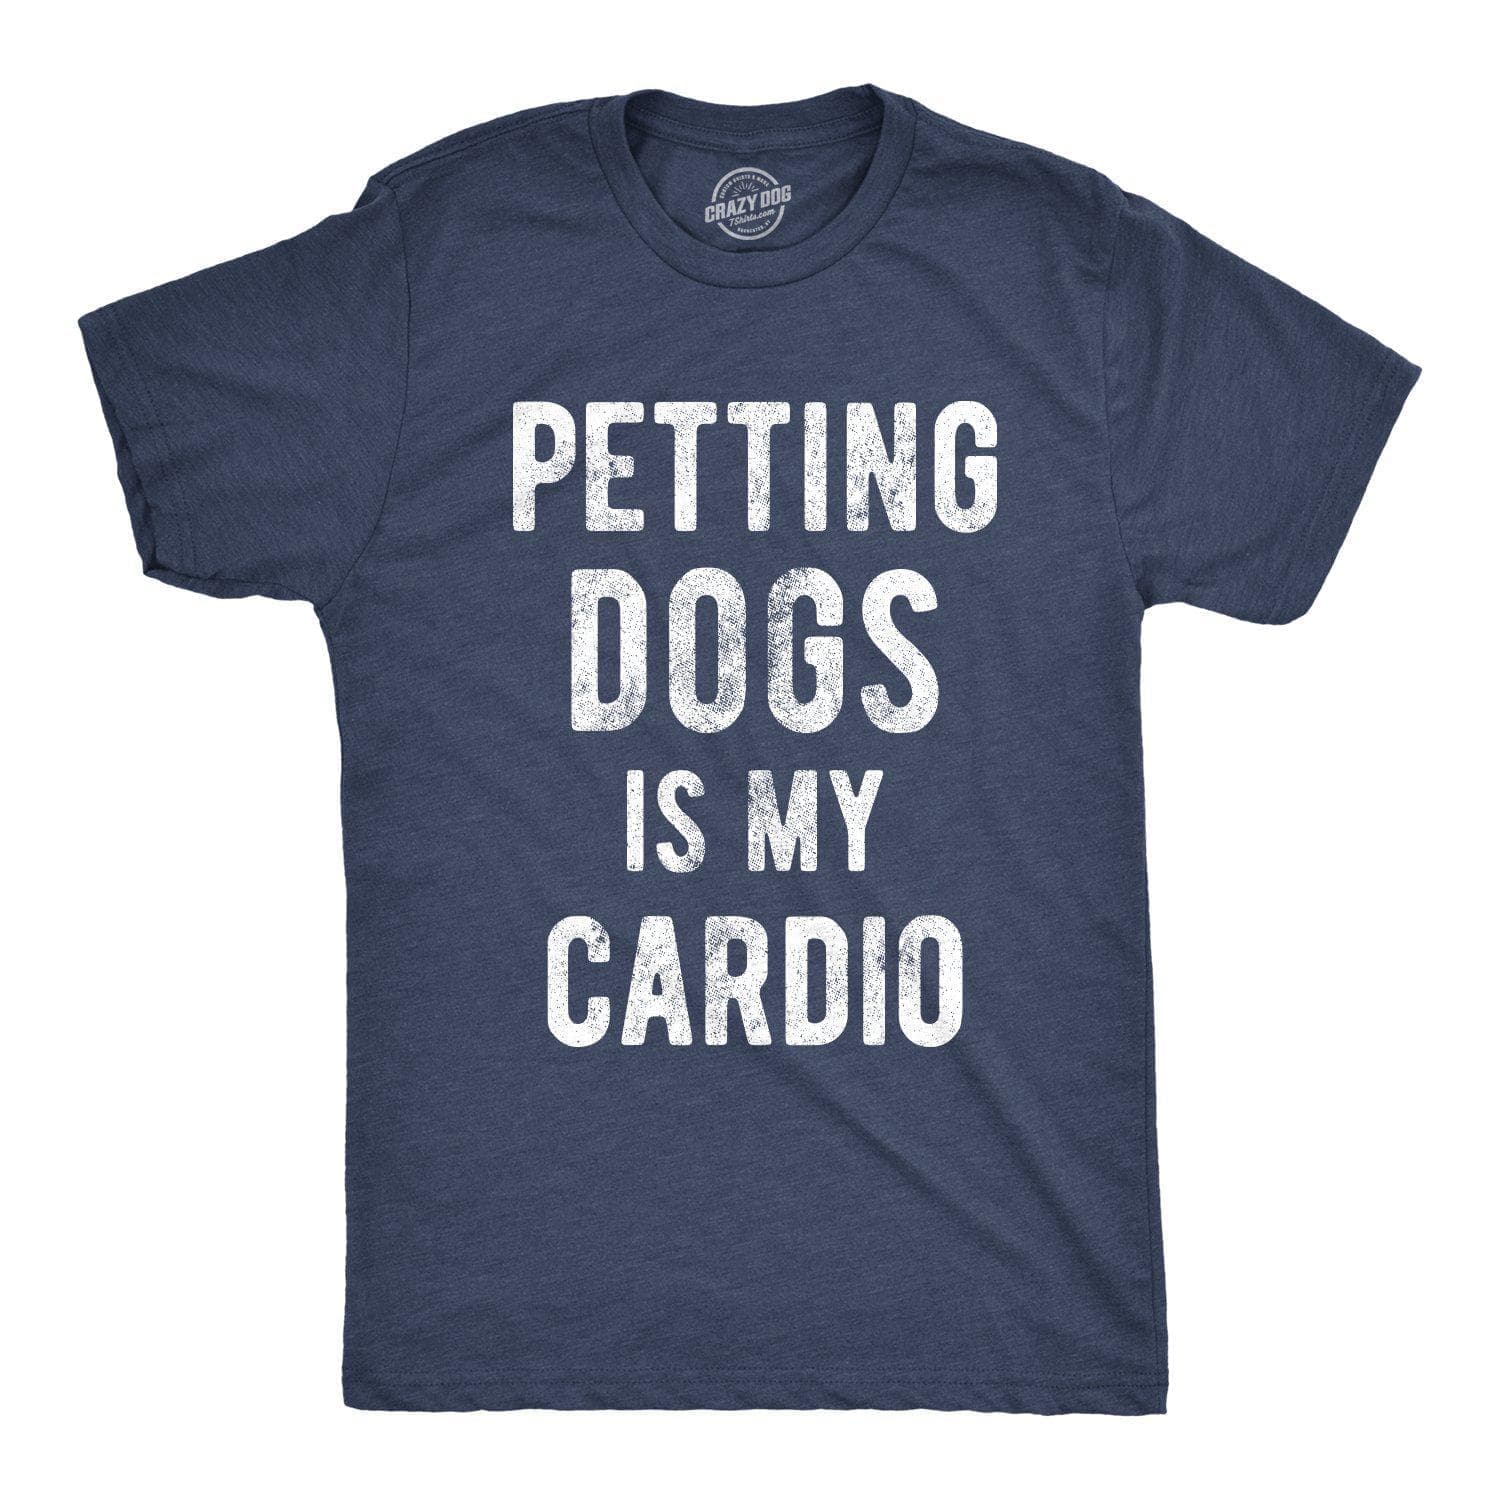 Petting Dogs Is My Cardio Men's Tshirt - Crazy Dog T-Shirts